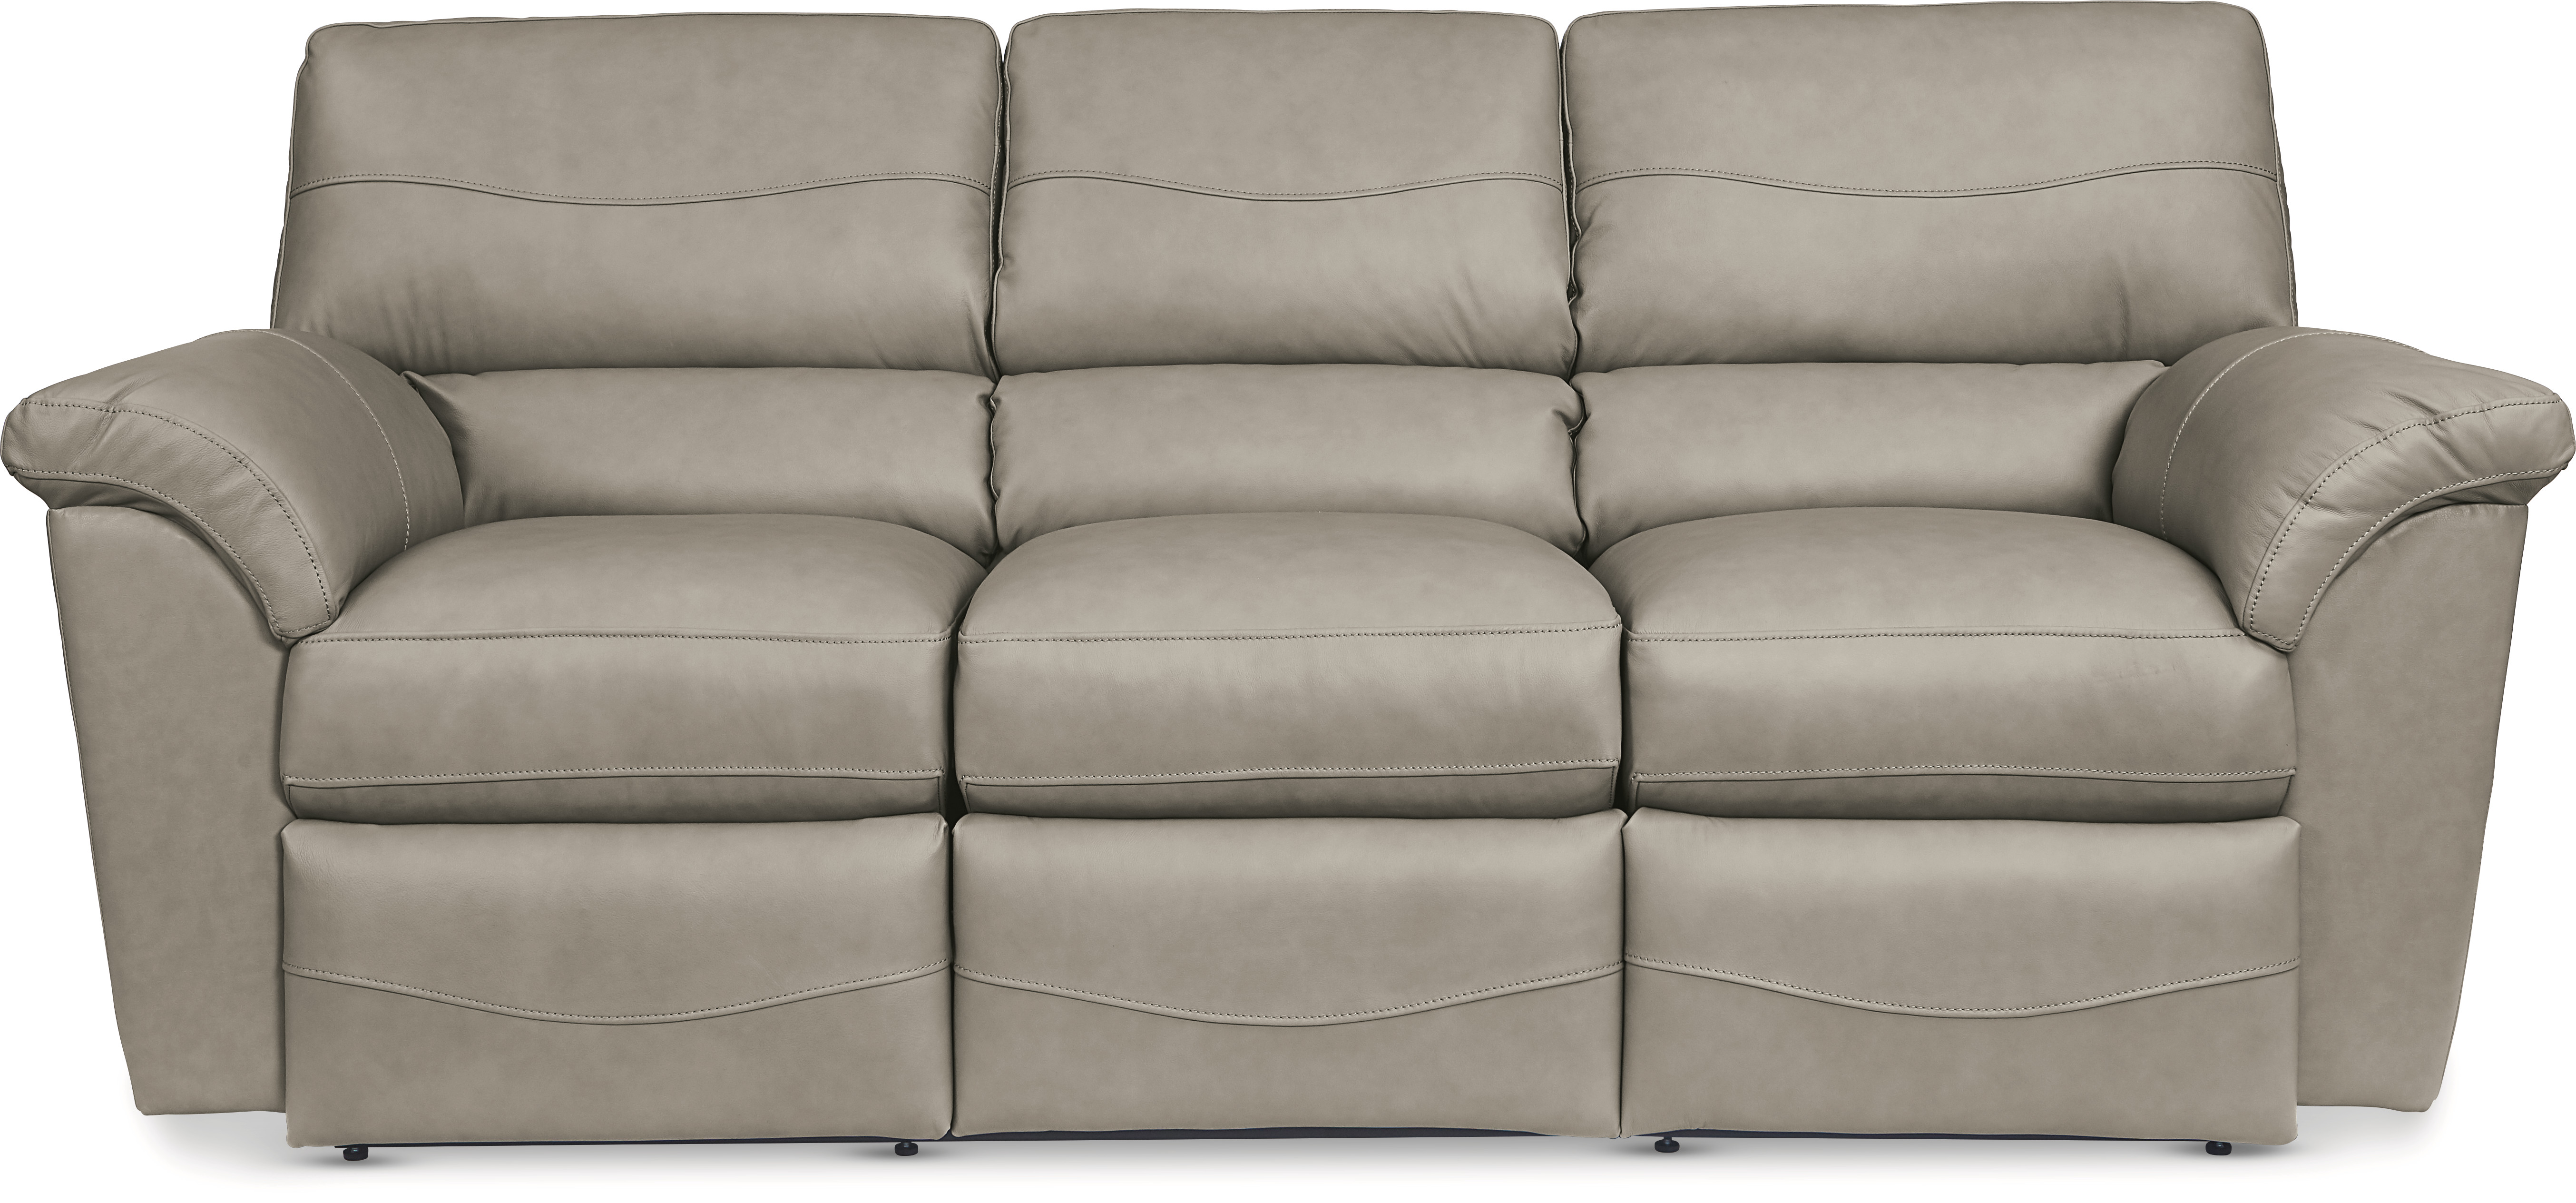 Image - 1 - Reese Leather Reclining Sofa